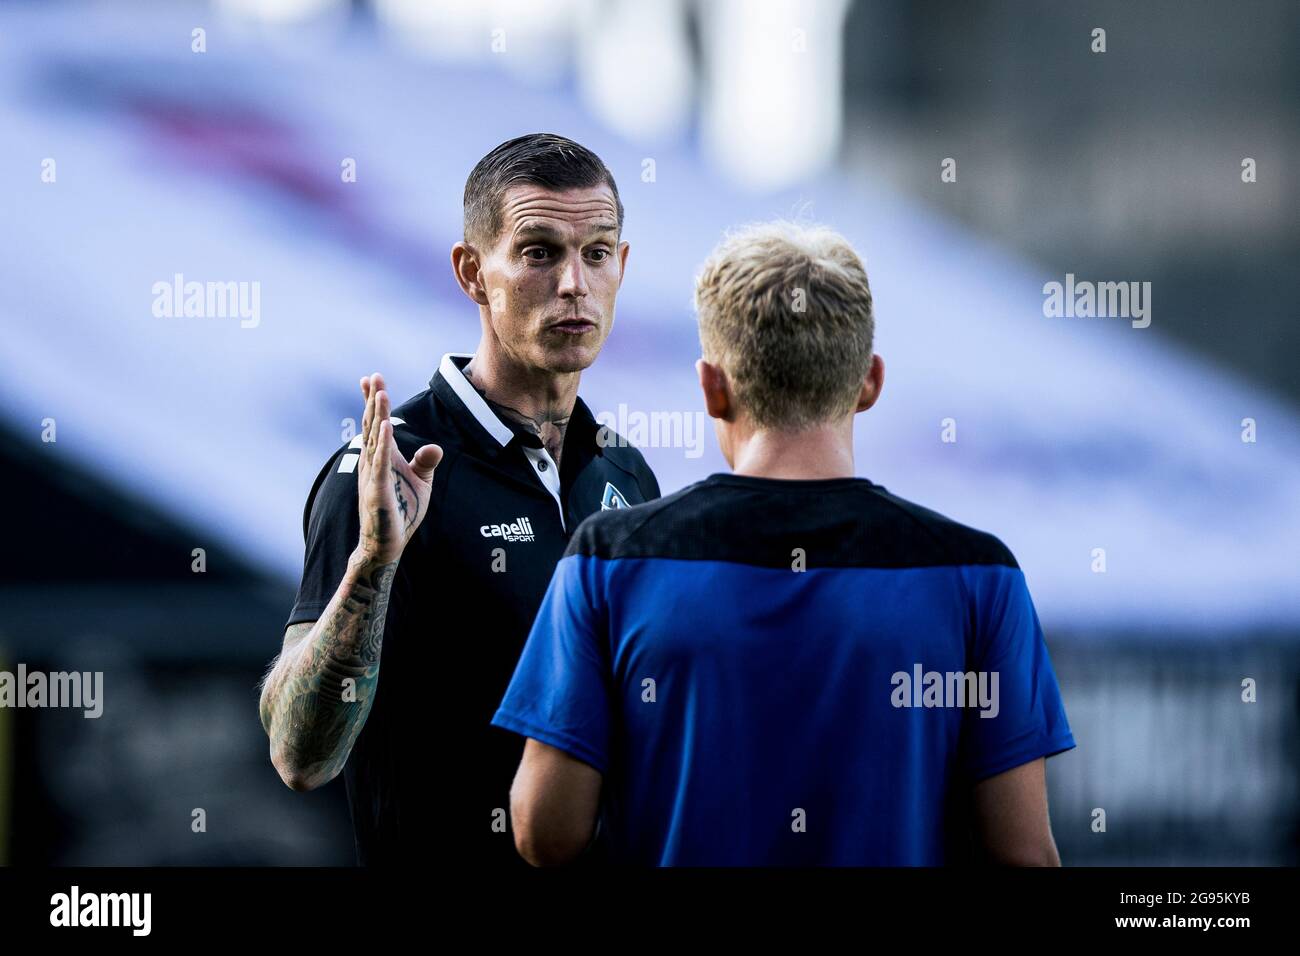 Horsens, Denmark. 23rd July, 2021. Head coach Daniel Agger of HB Koege seen during the NordicBet Liga match between AC and HB Koege at Casa Arena in Horsens. (Photo Credit: